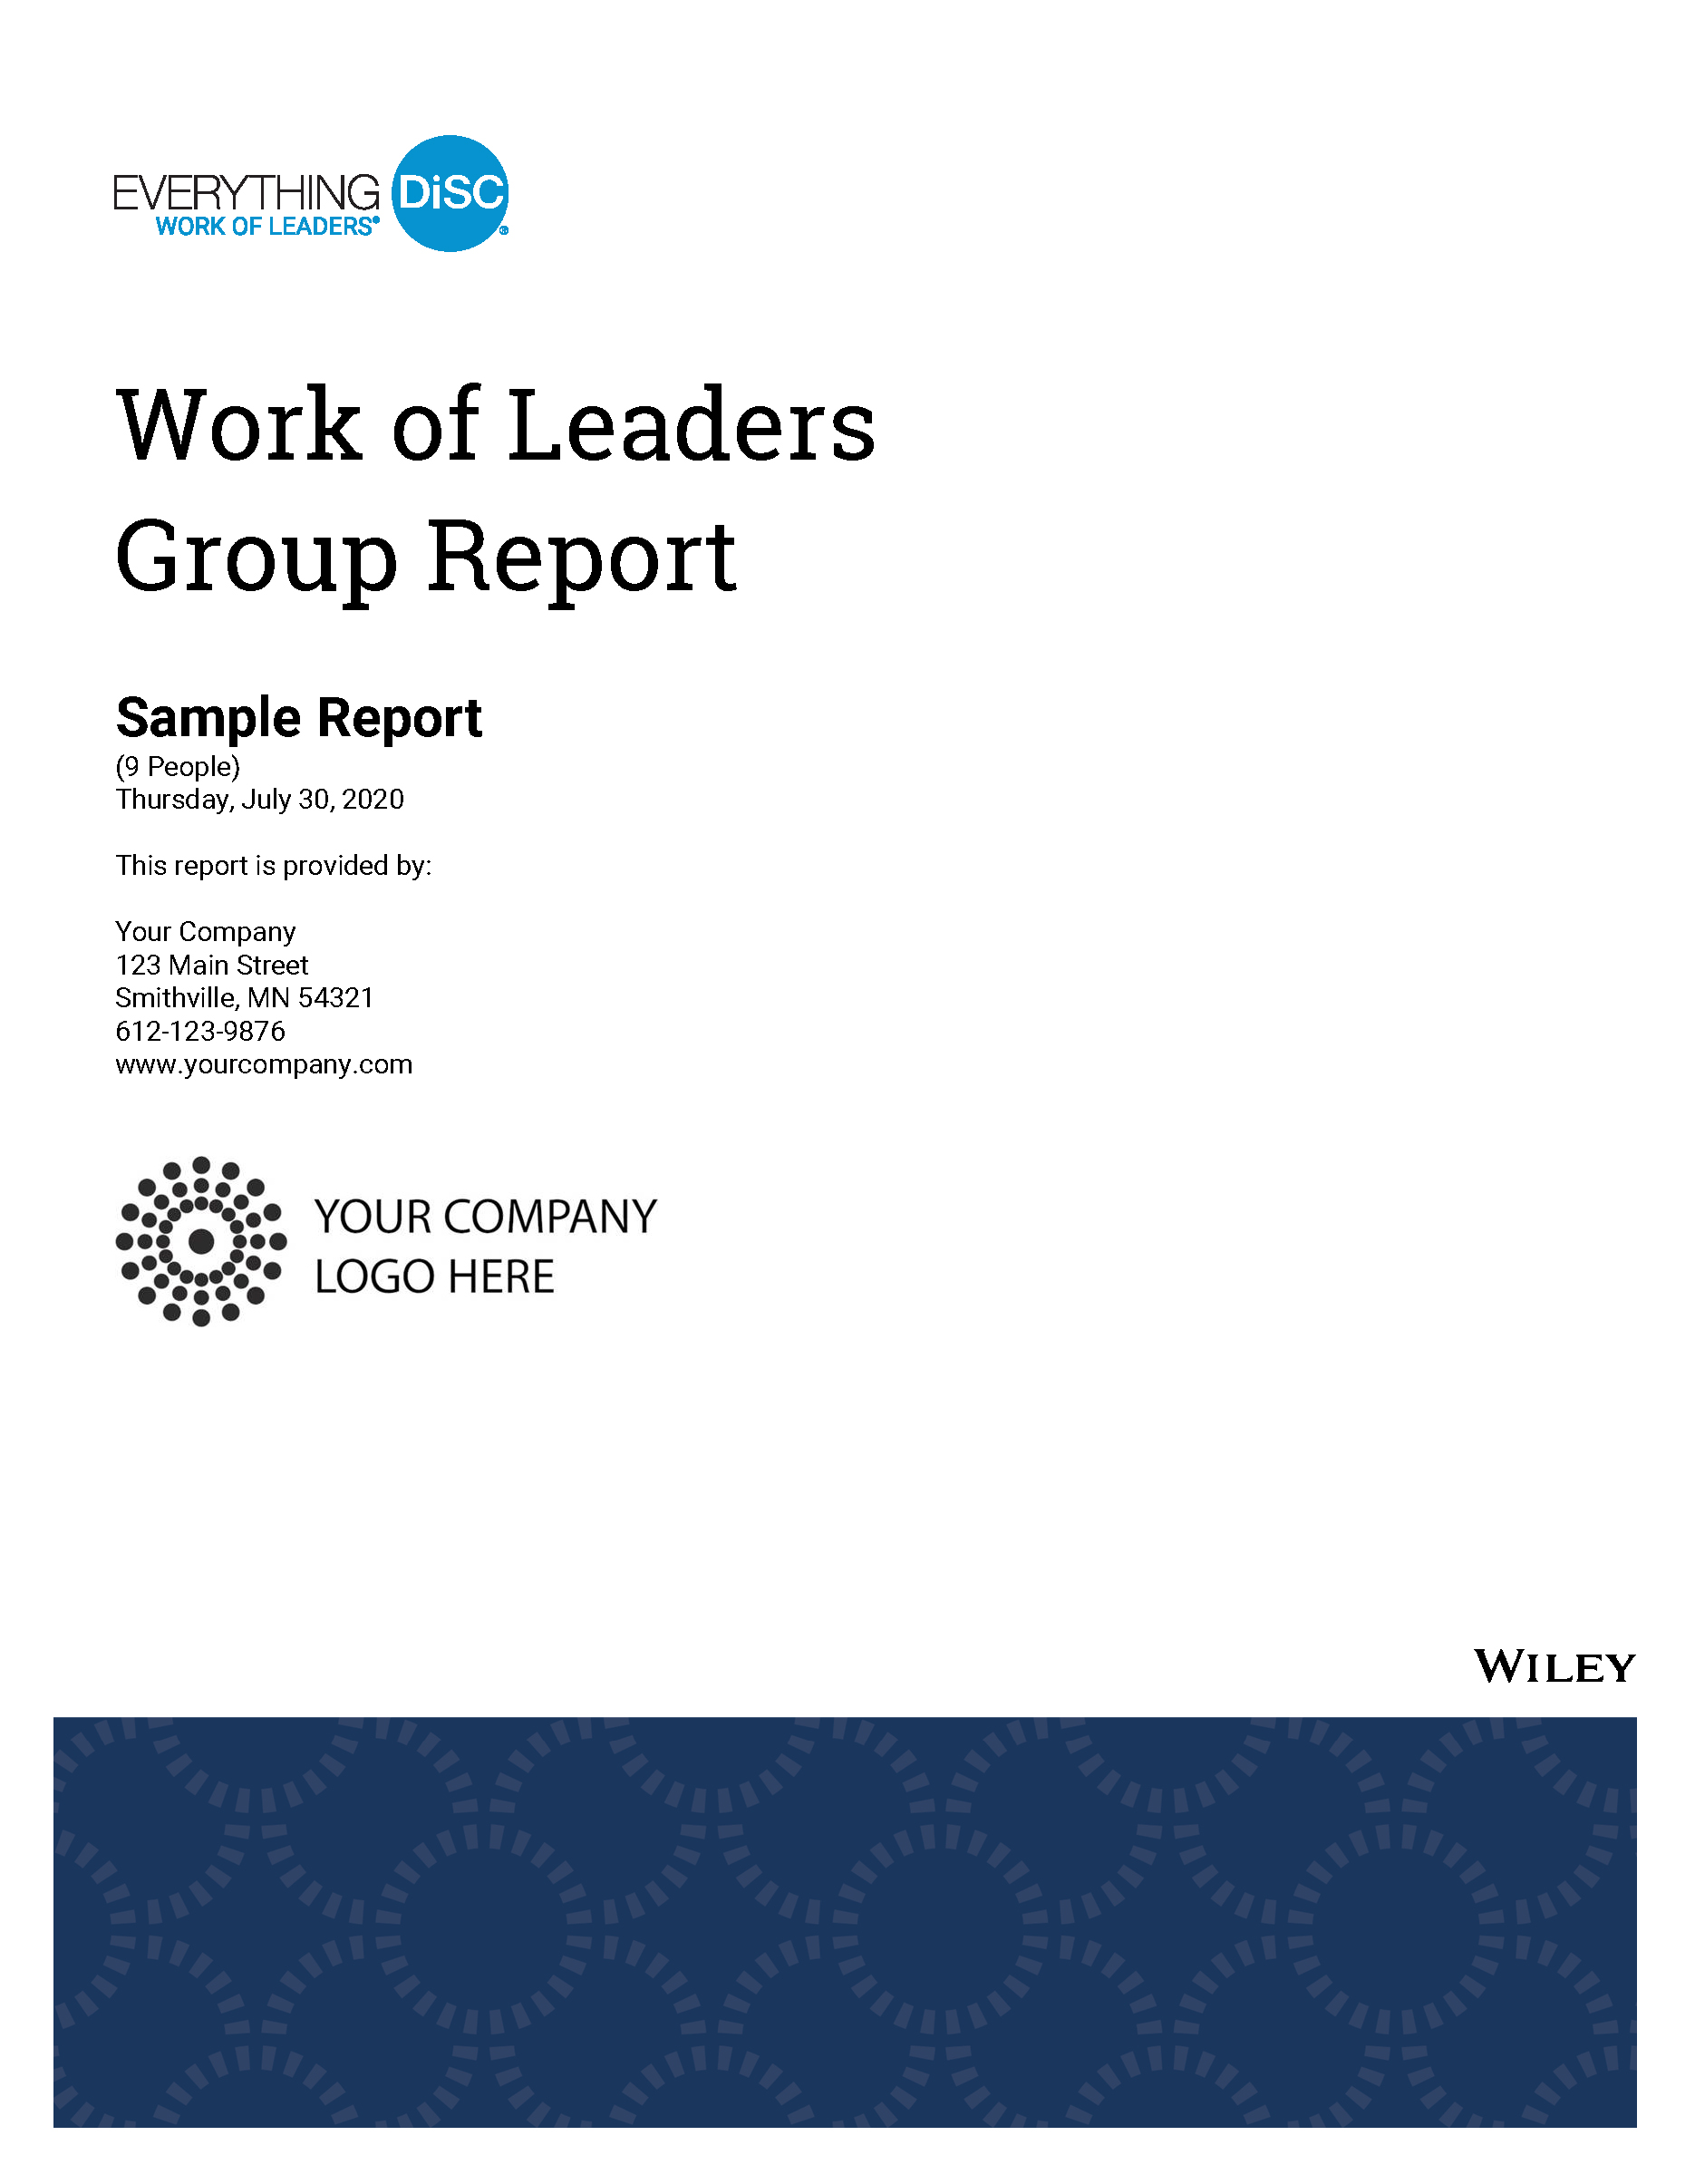 Everything DiSC Work of Leaders Group Sample Report Cover Image